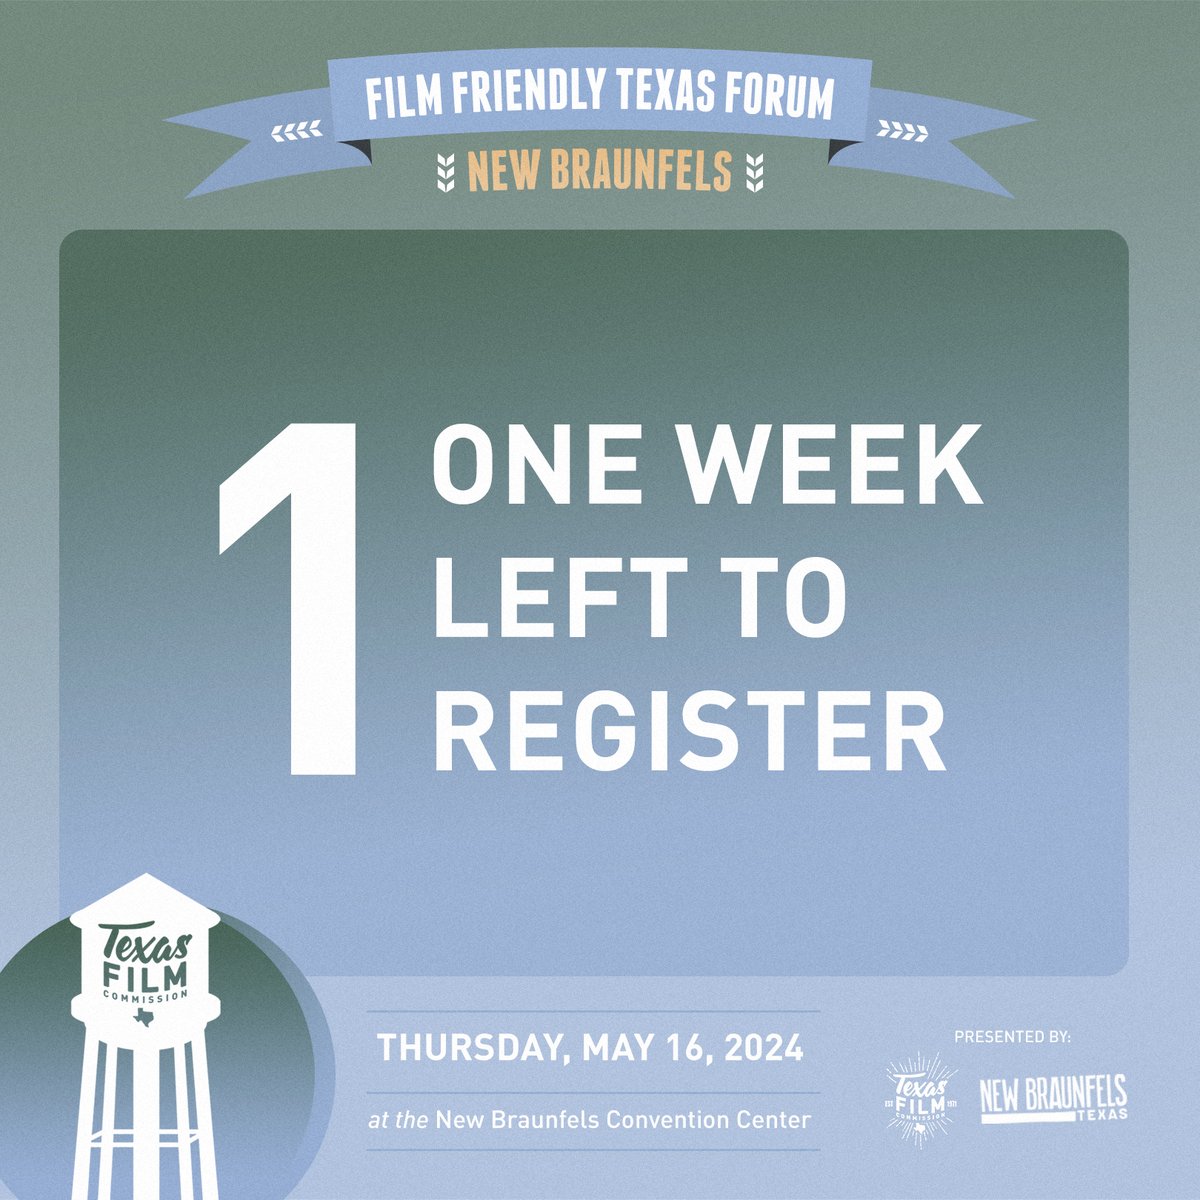 One week left to register for the Film Friendly Texas Forum with the @TexasFilmComm! Sign up at bit.ly/3wk8kDV to learn more about: ☑️Film Friendly Texas program ☑️Digital Media Friendly Texas program ☑️Starting & growing a film festival ☑️Identifying incentives & more!